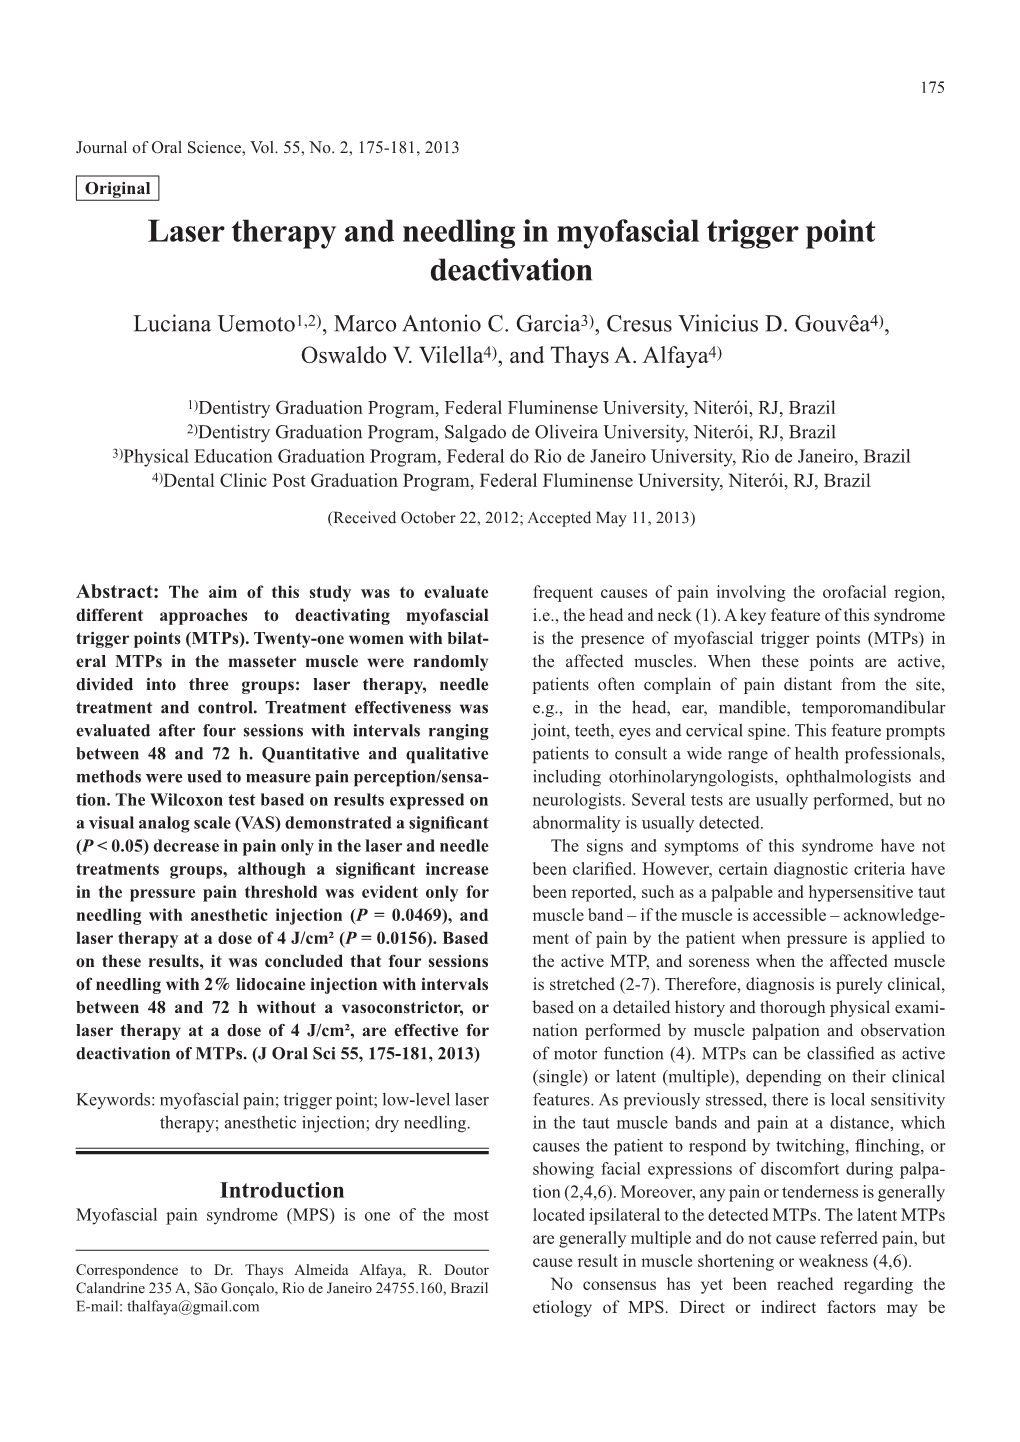 Laser Therapy and Needling in Myofascial Trigger Point Deactivation Luciana Uemoto1,2), Marco Antonio C